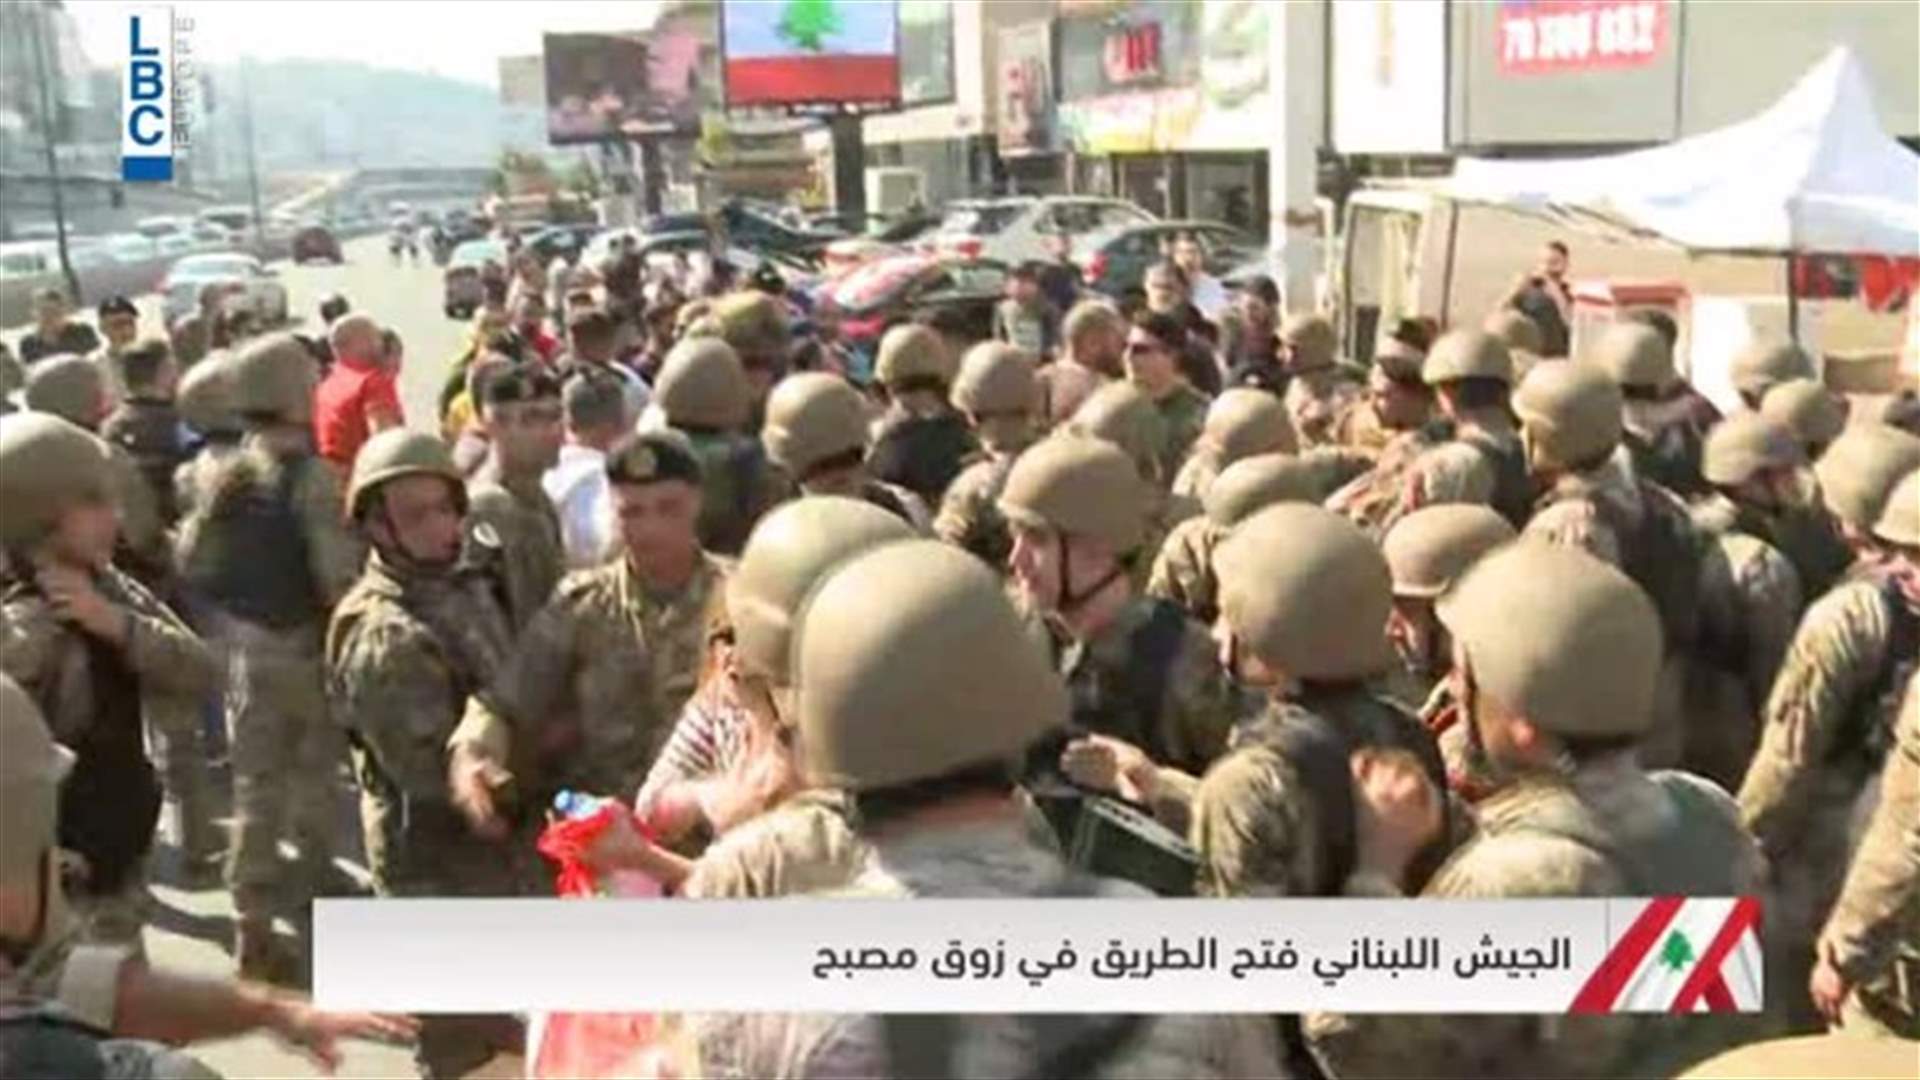 Clash between army and protesters after reopening the highway in Zouk Mosbeh (Video)